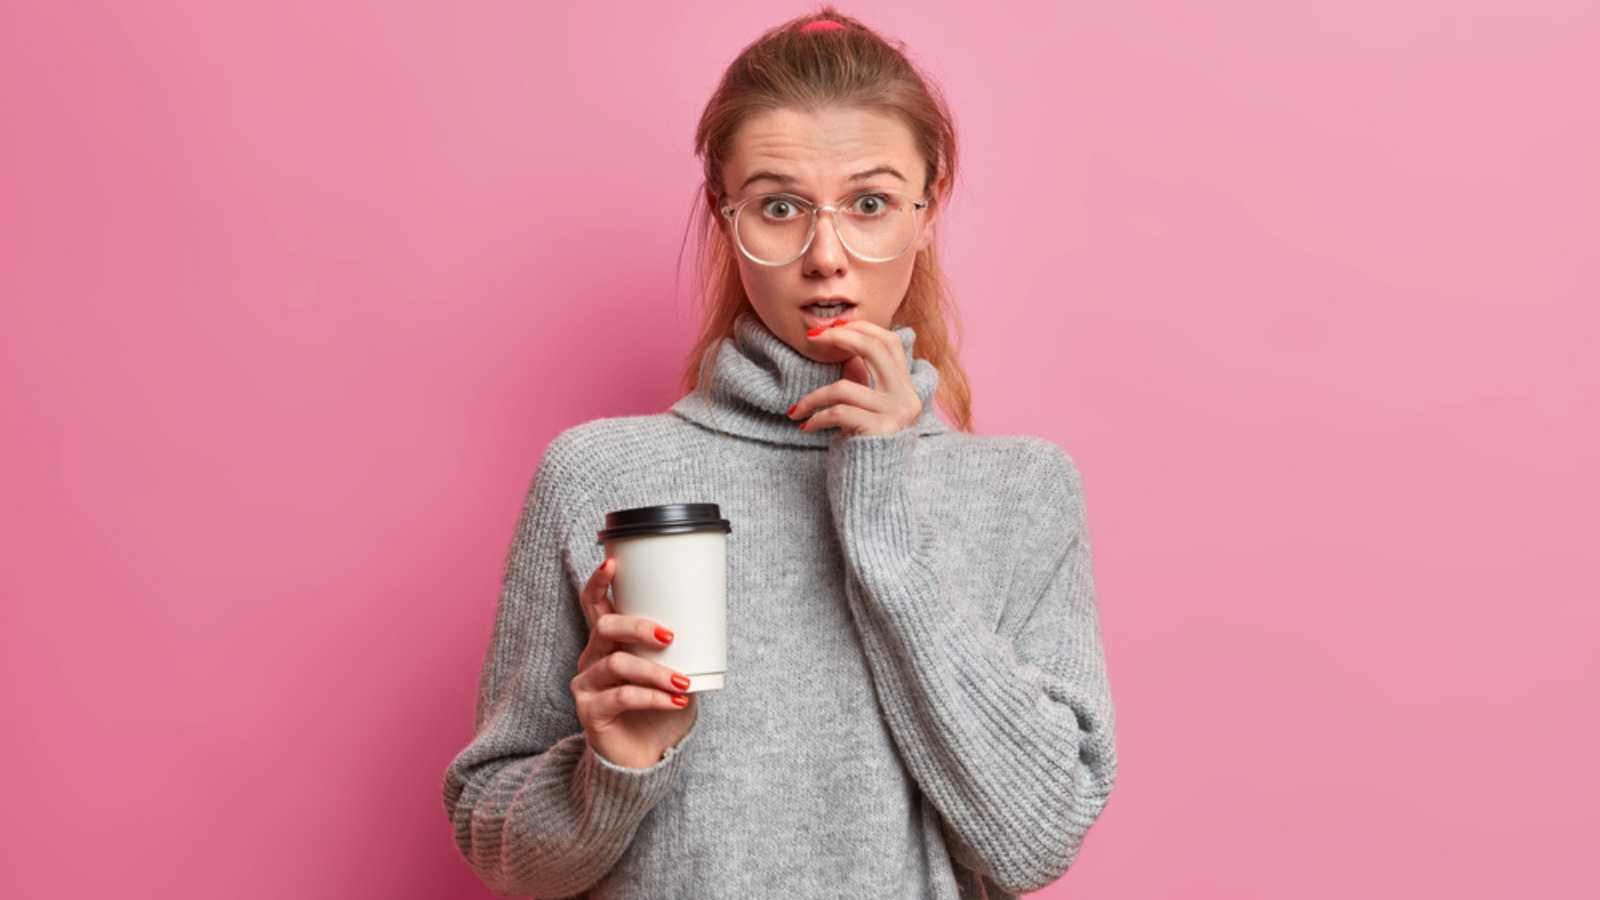 Shocked Young Woman With Coffee